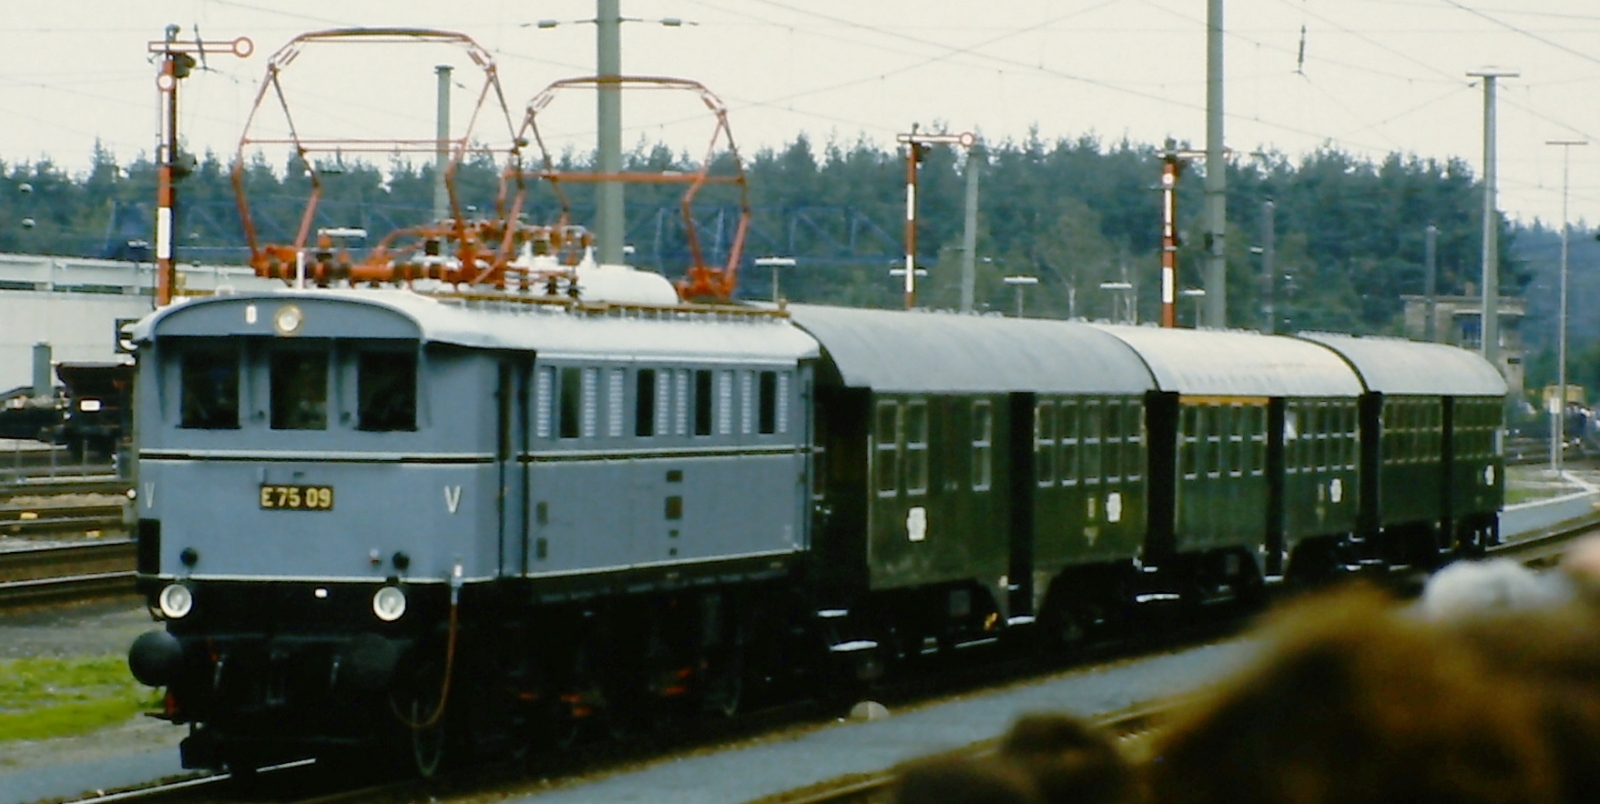 E 75 09 with a local train at the anniversary parade for 150 years of German railways in Nuremberg